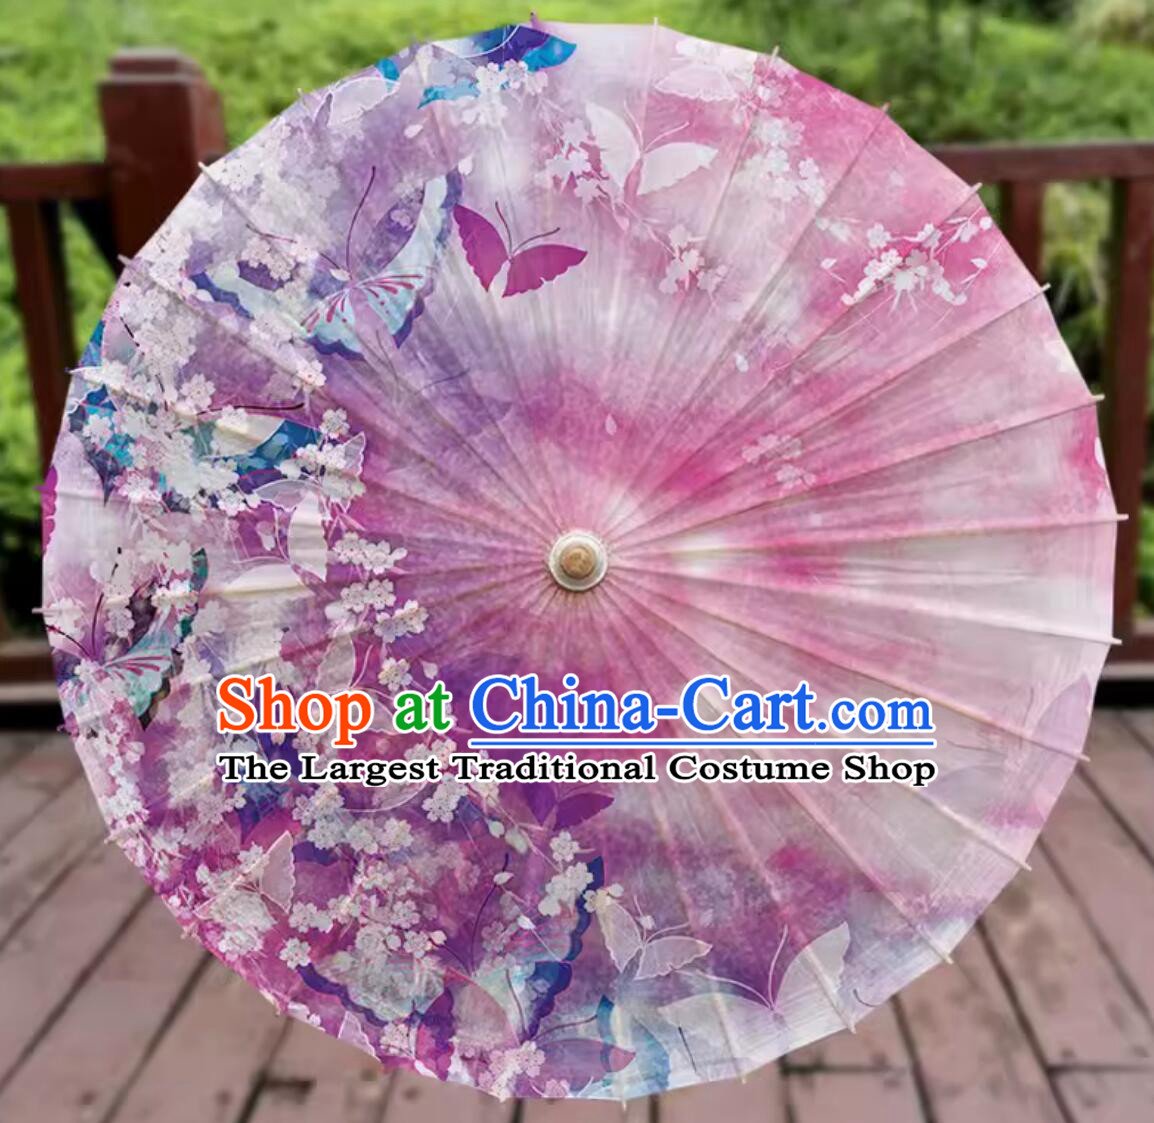 Chinese Handmade Umbrella Traditional Dance Umbrella Painted Butterfly Oil-paper Umbrella